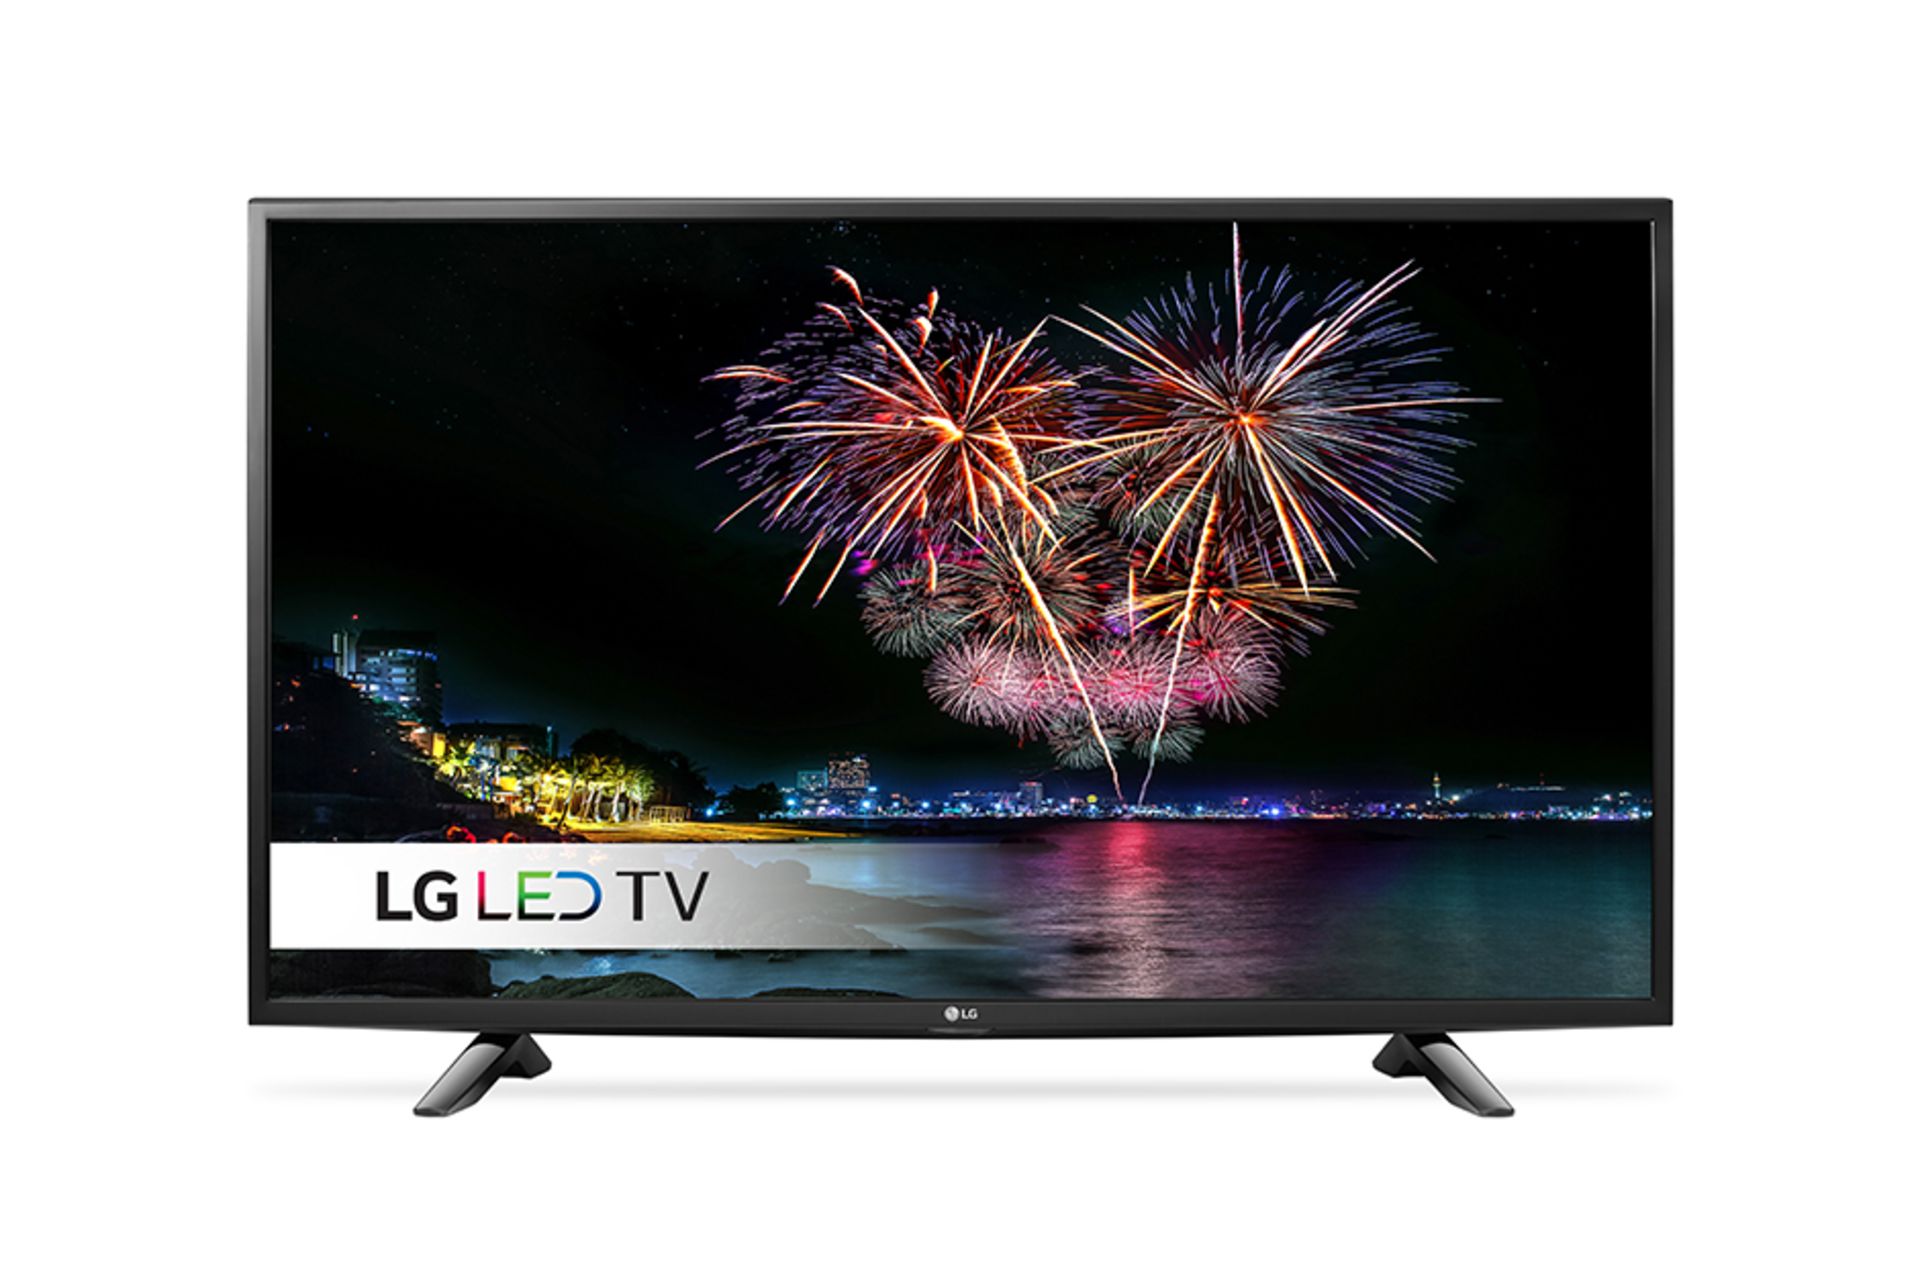 V Grade A LG 49" LED TV With Freeview - Virtual Surround - Built In Games - Clear Voice - Picture